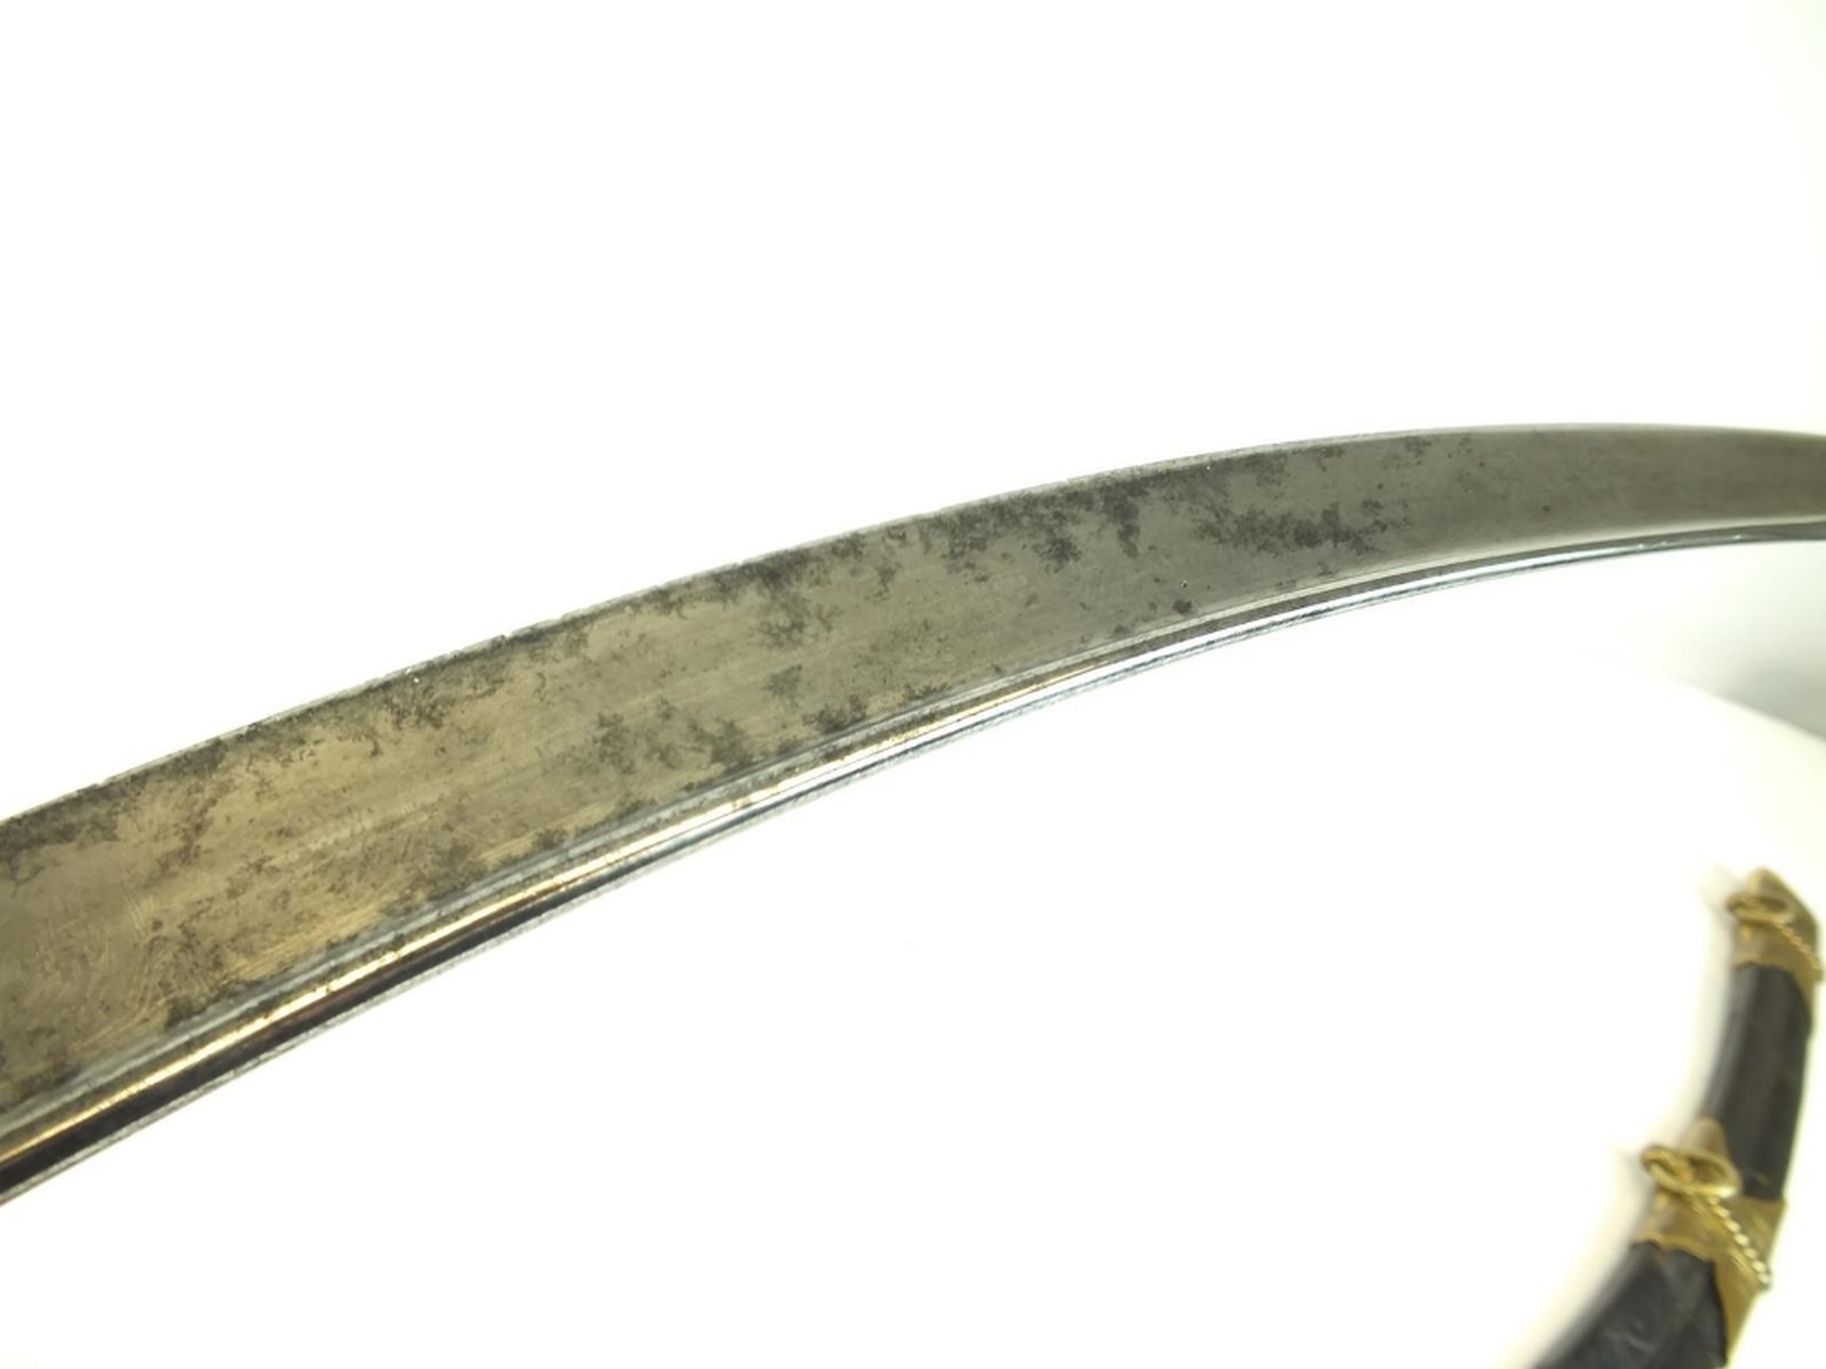 A LATE 18TH OR EARLY 19TH CENTURY PRESENTATION QUALITY SABRE BY PROSSER, 83cm sharply curved pipe- - Image 18 of 18